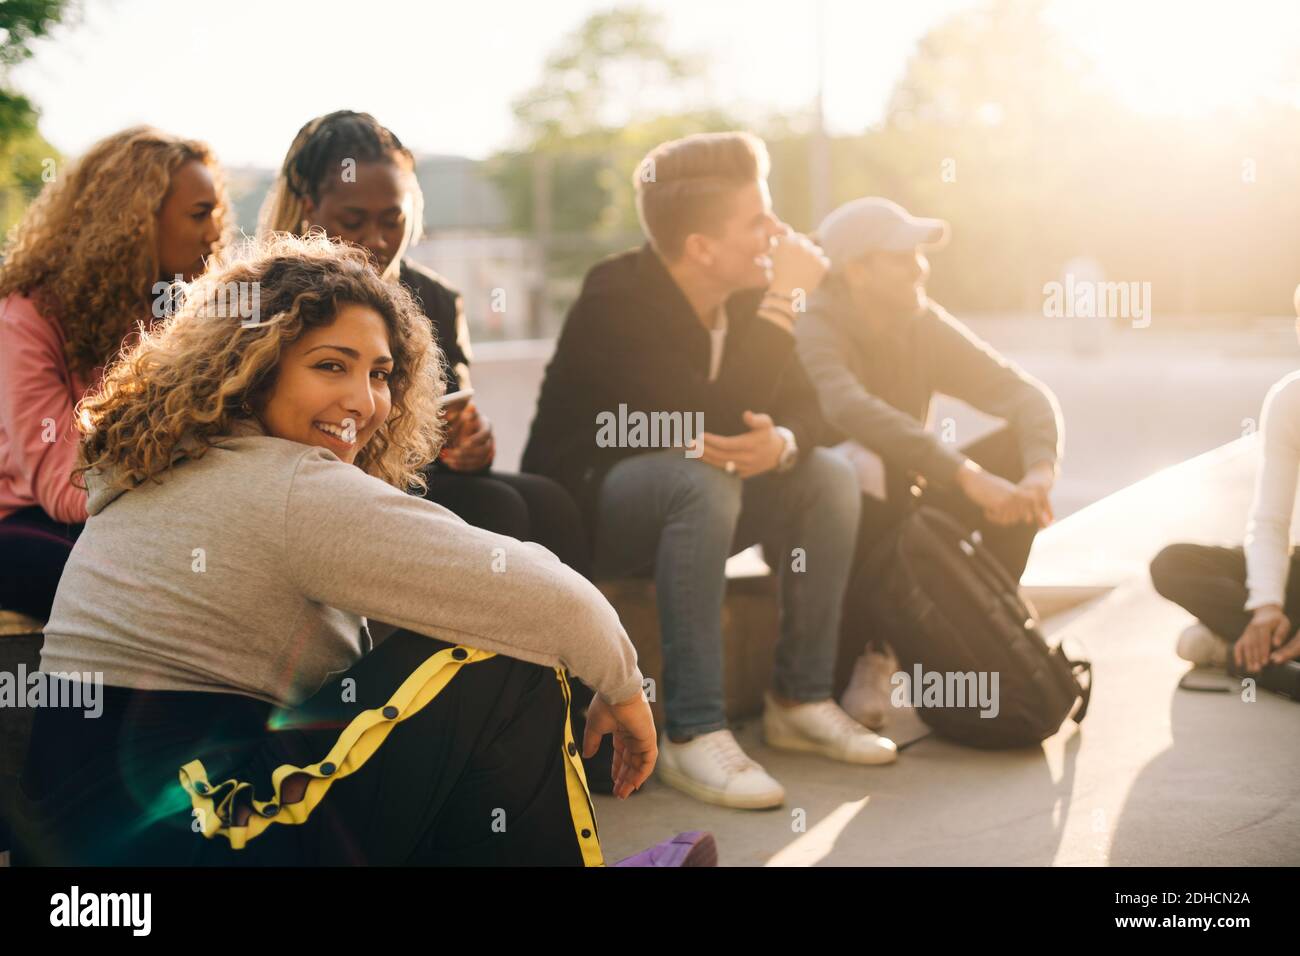 Portrait of smiling young woman sitting with friends at skateboard park Stock Photo